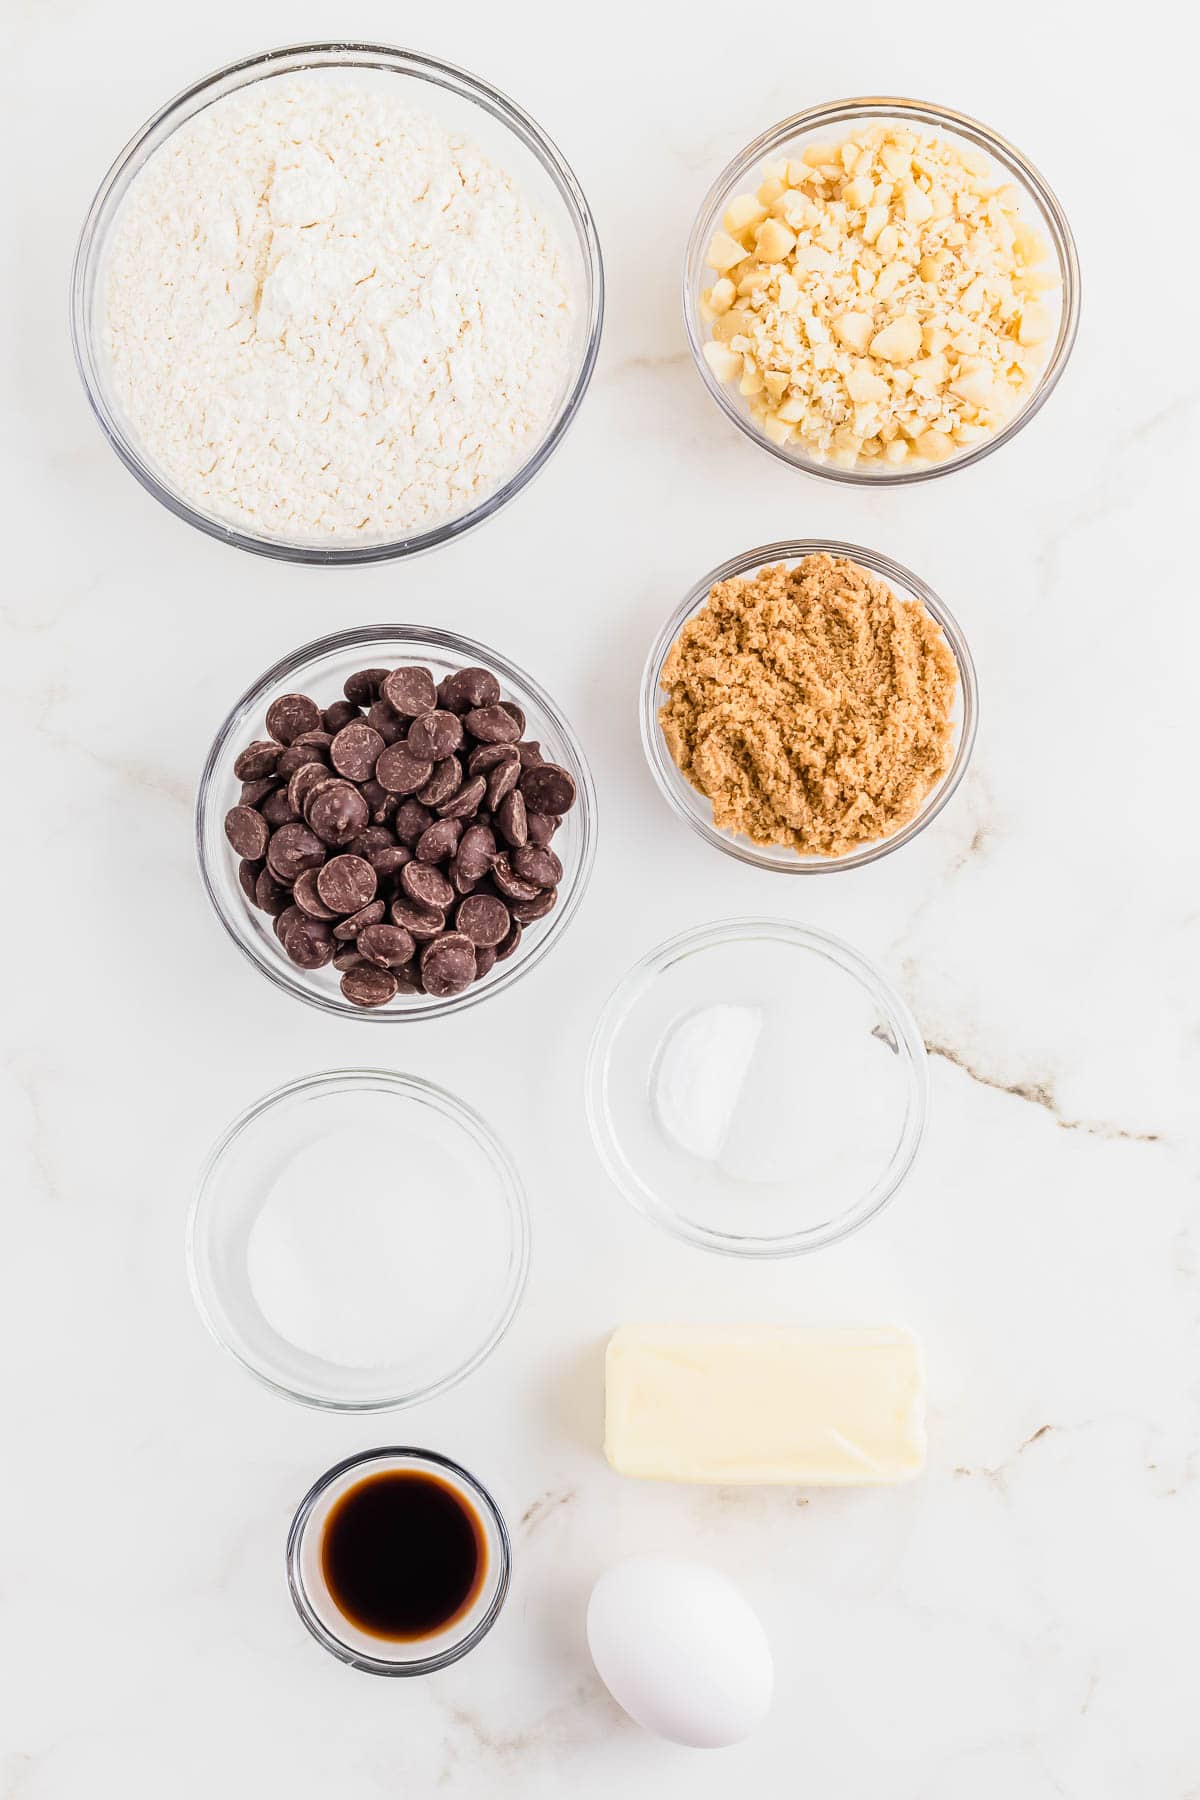 Ingredients laid out in glass bowls to make macadamia nut chocolate chip cookies on a marble surface.